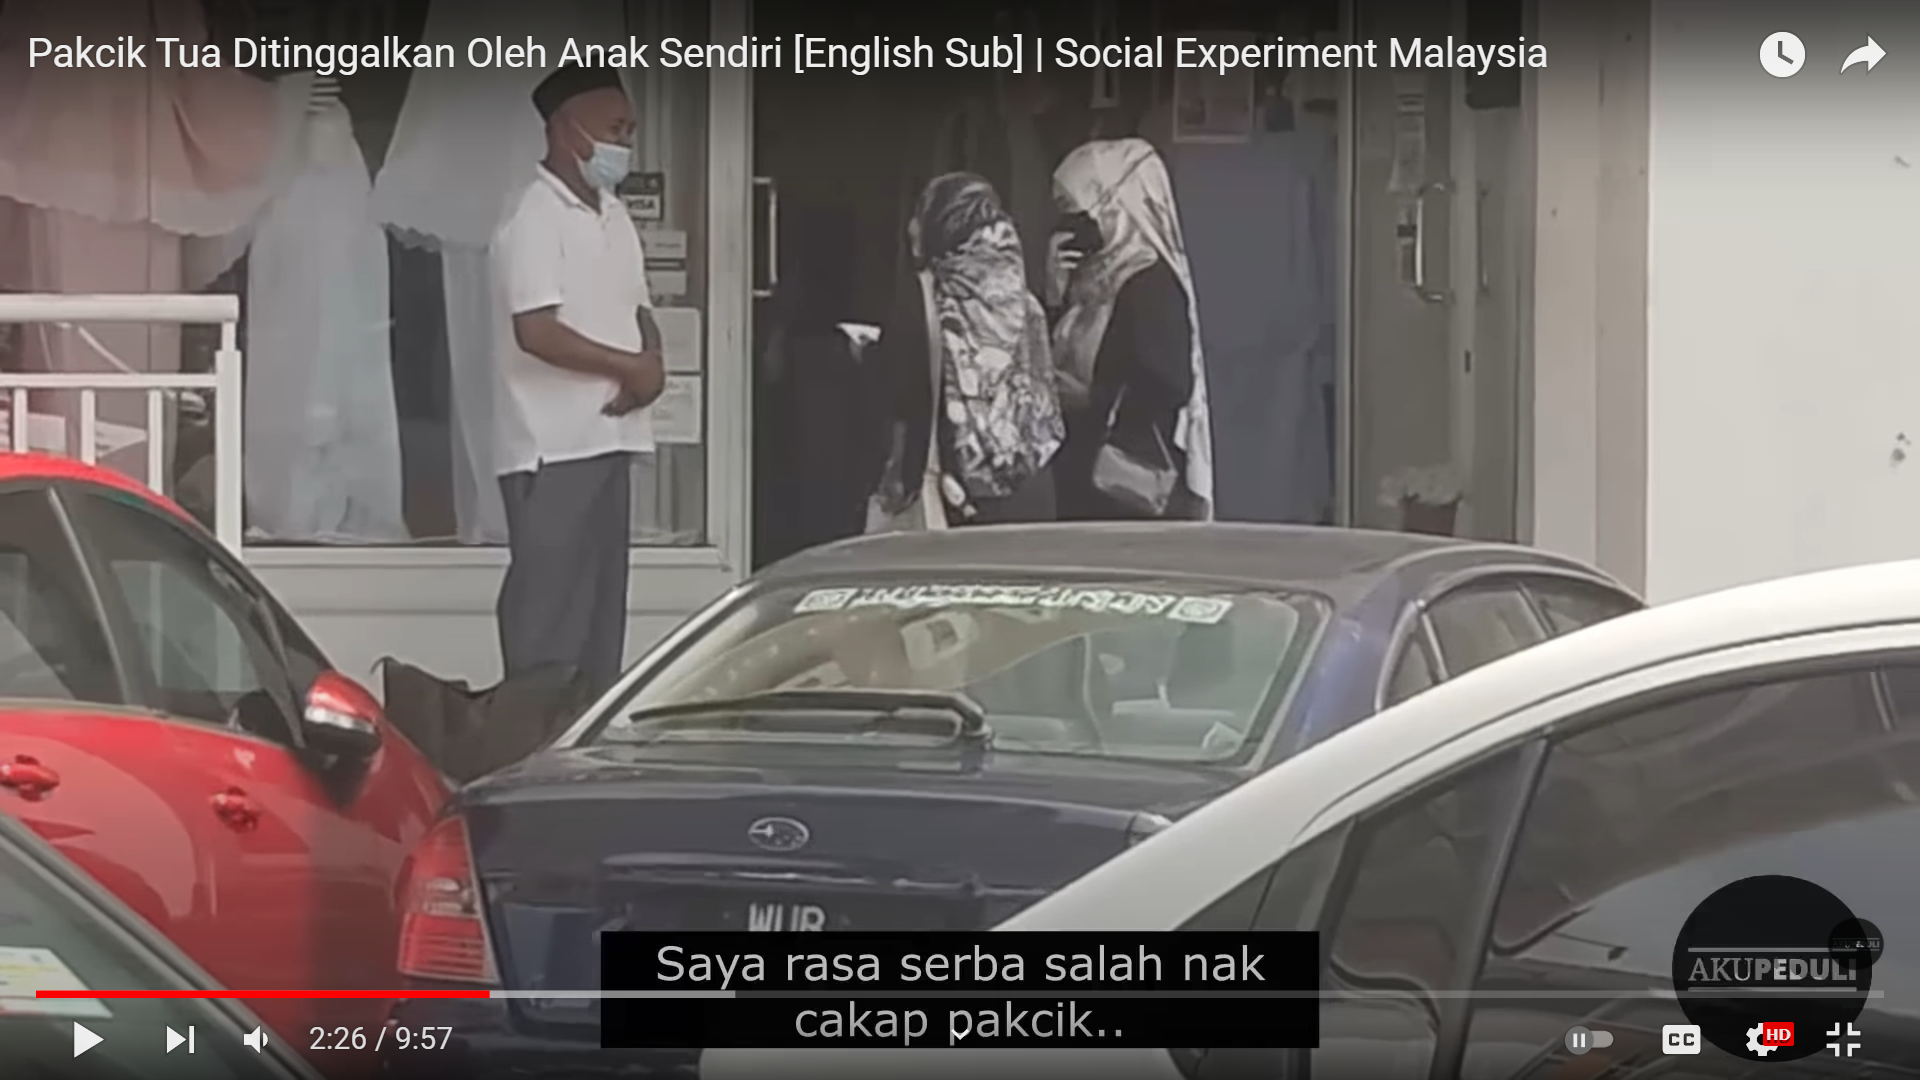 'where's my son? ' aku peduli's heartbreaking social experiment reduces many to tears | weirdkaya